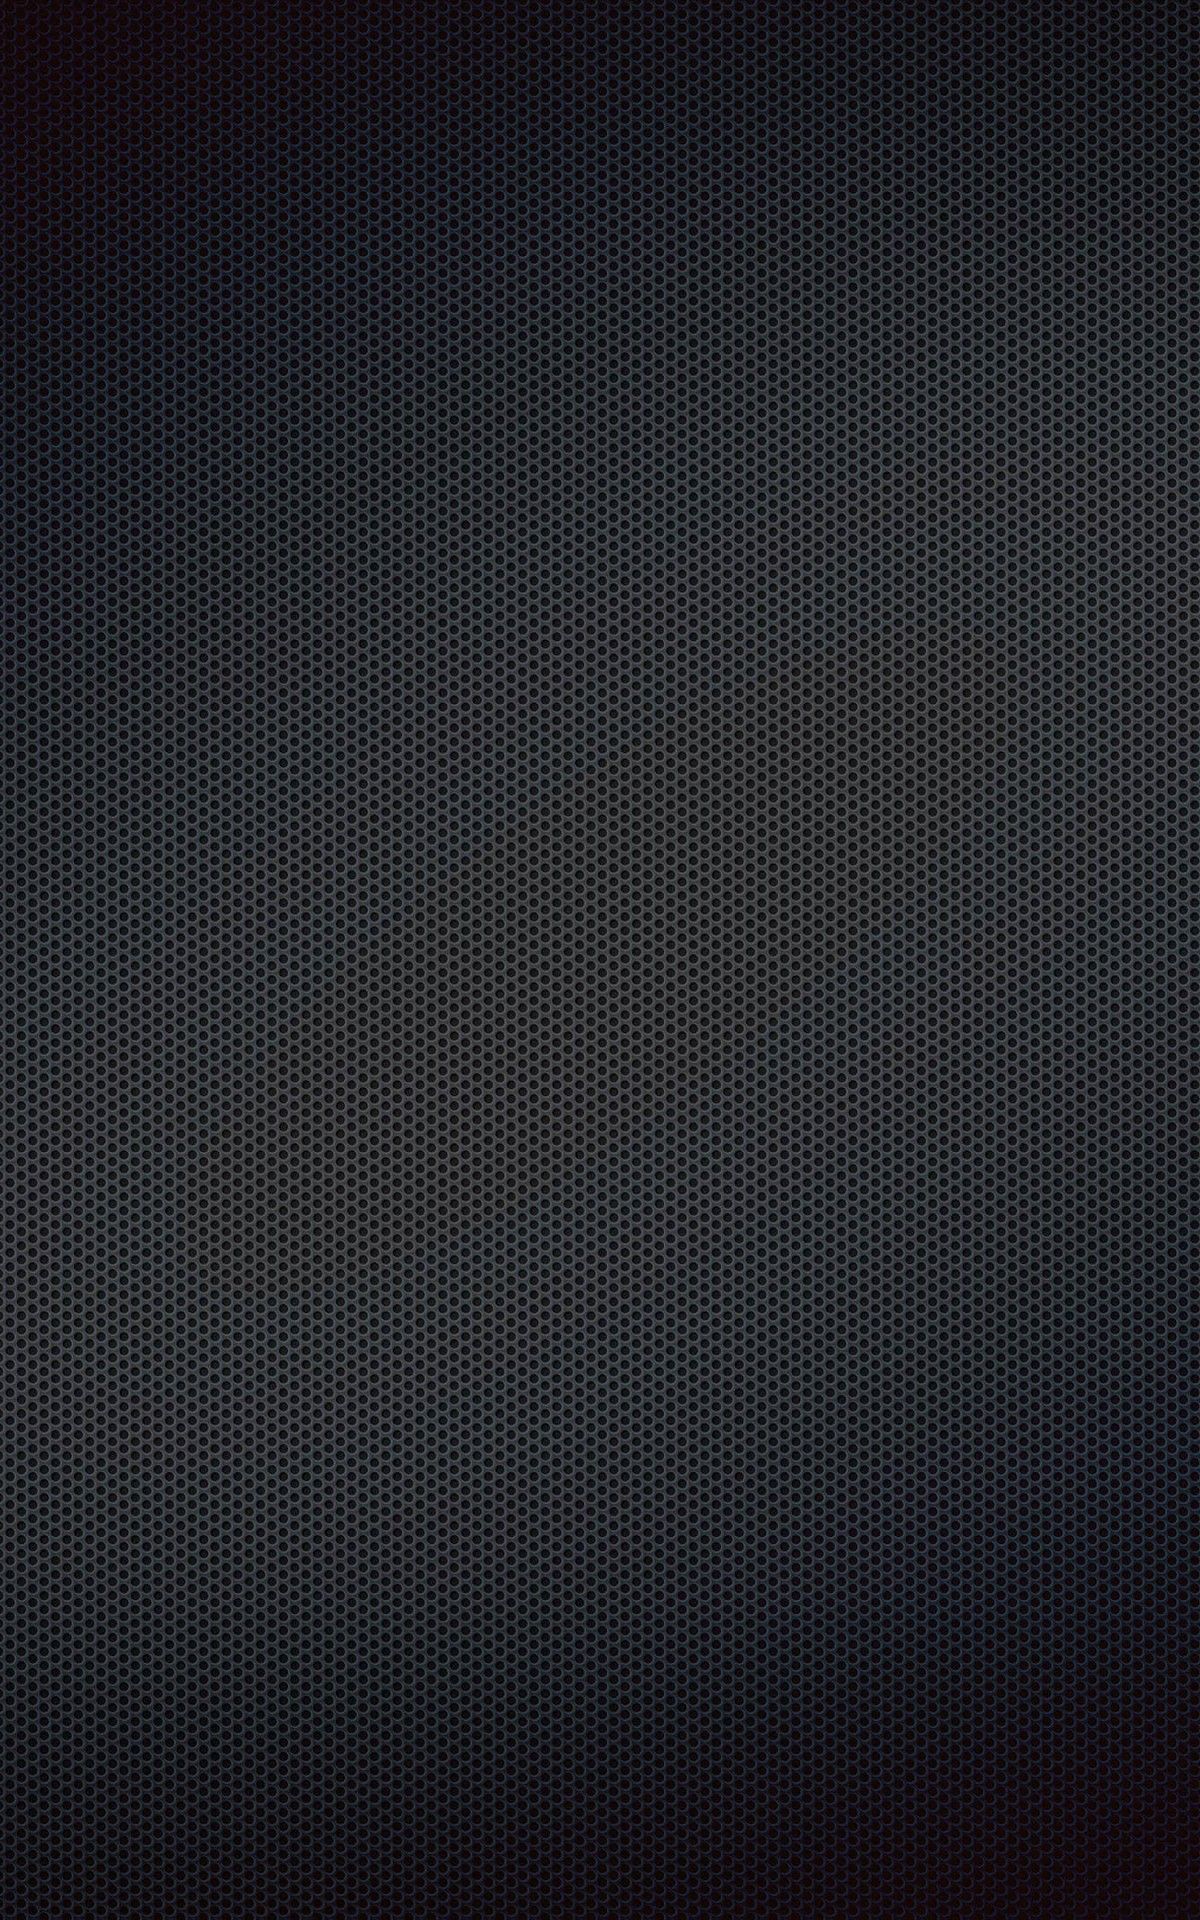 Download Black Grill Texture HD wallpaper for Kindle Fire HDX ...